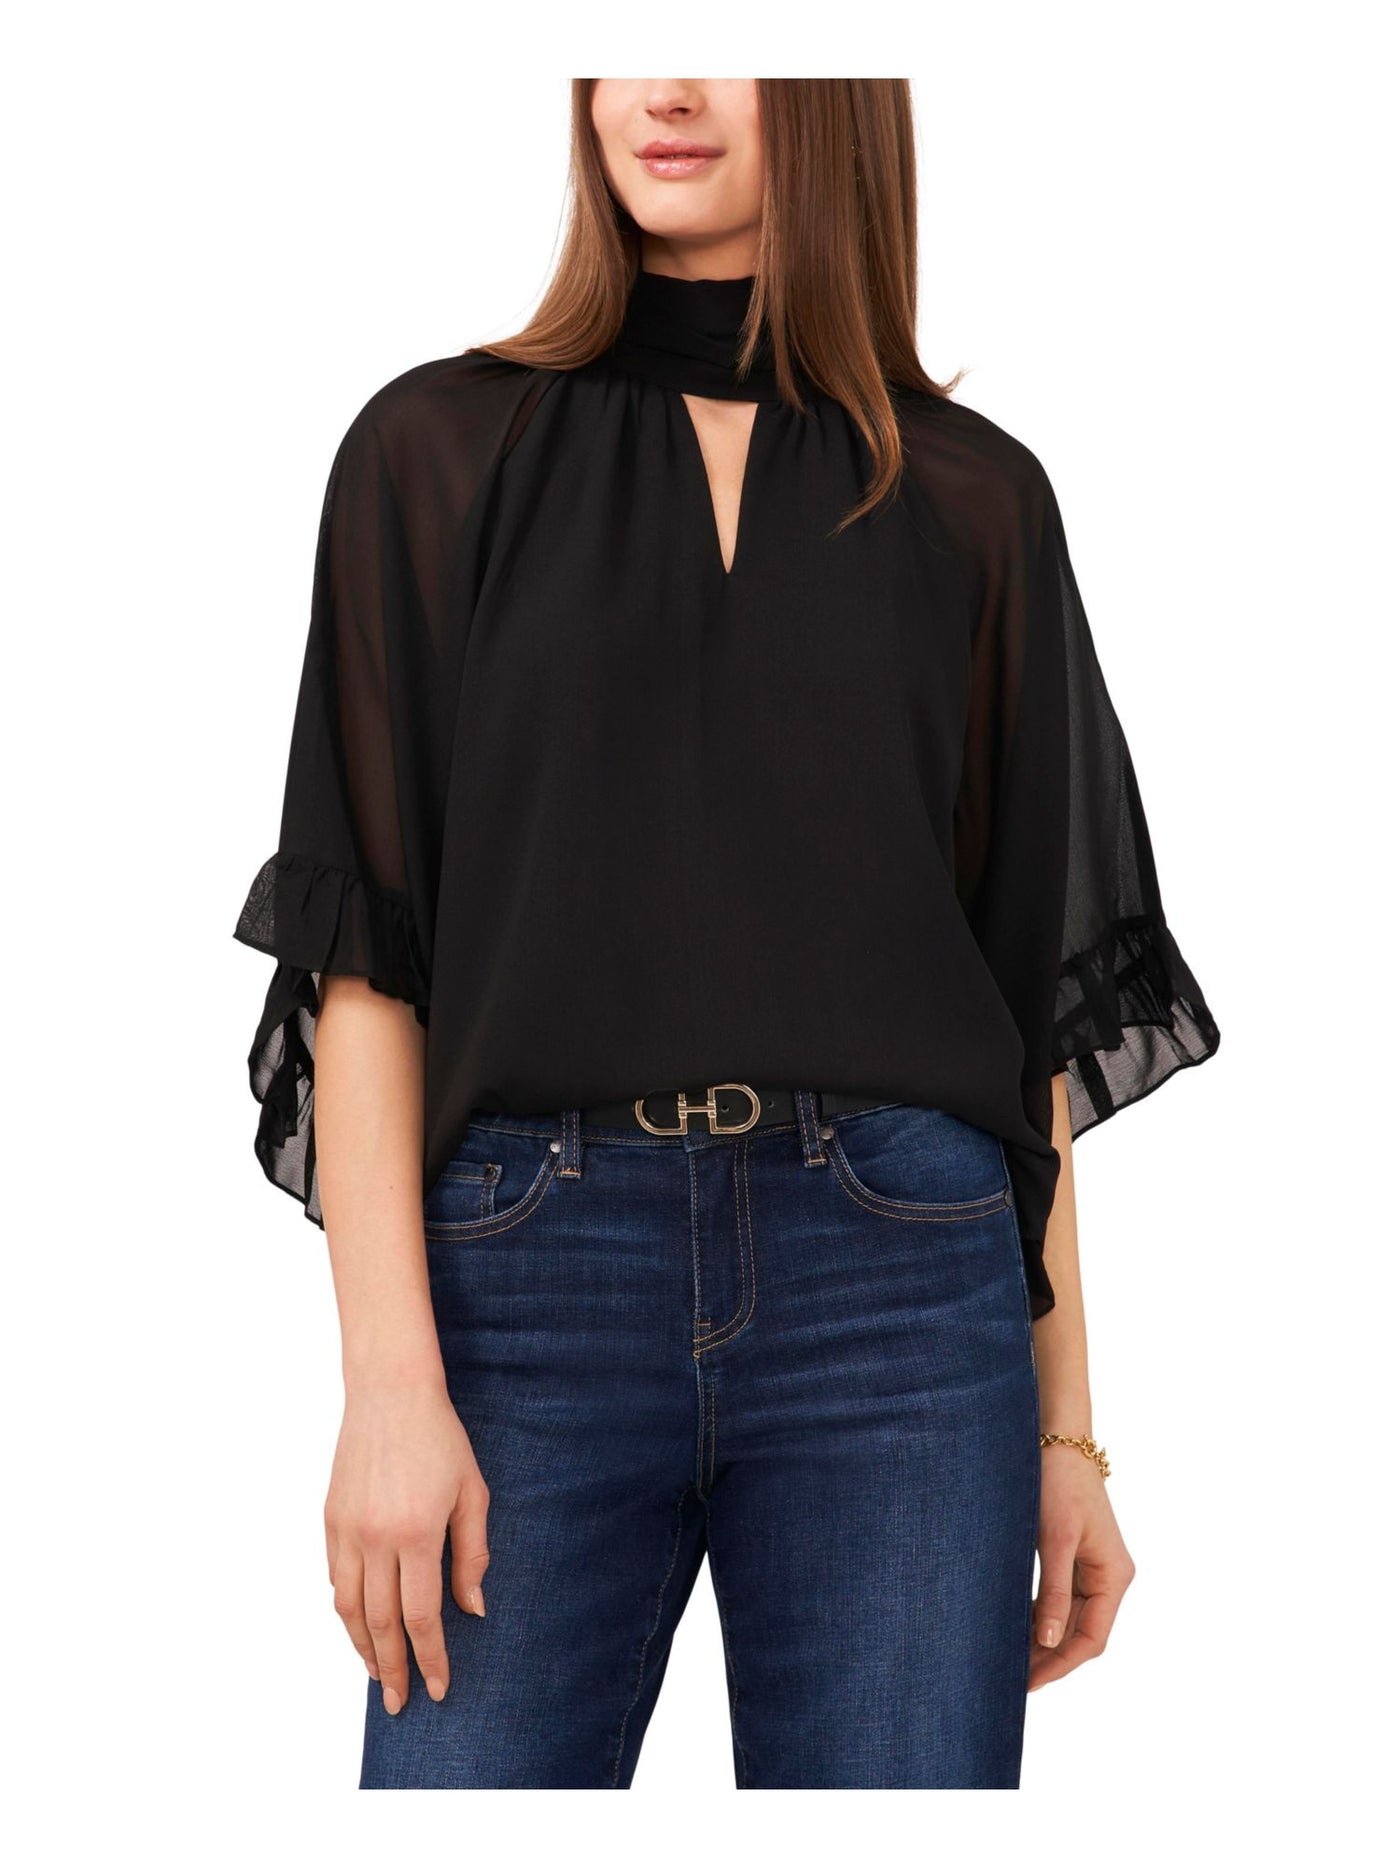 VINCE CAMUTO Womens Black Ruffled Sheer Cutout Front Keyhole Back Lined 3/4 Sleeve Mock Neck Party Top S